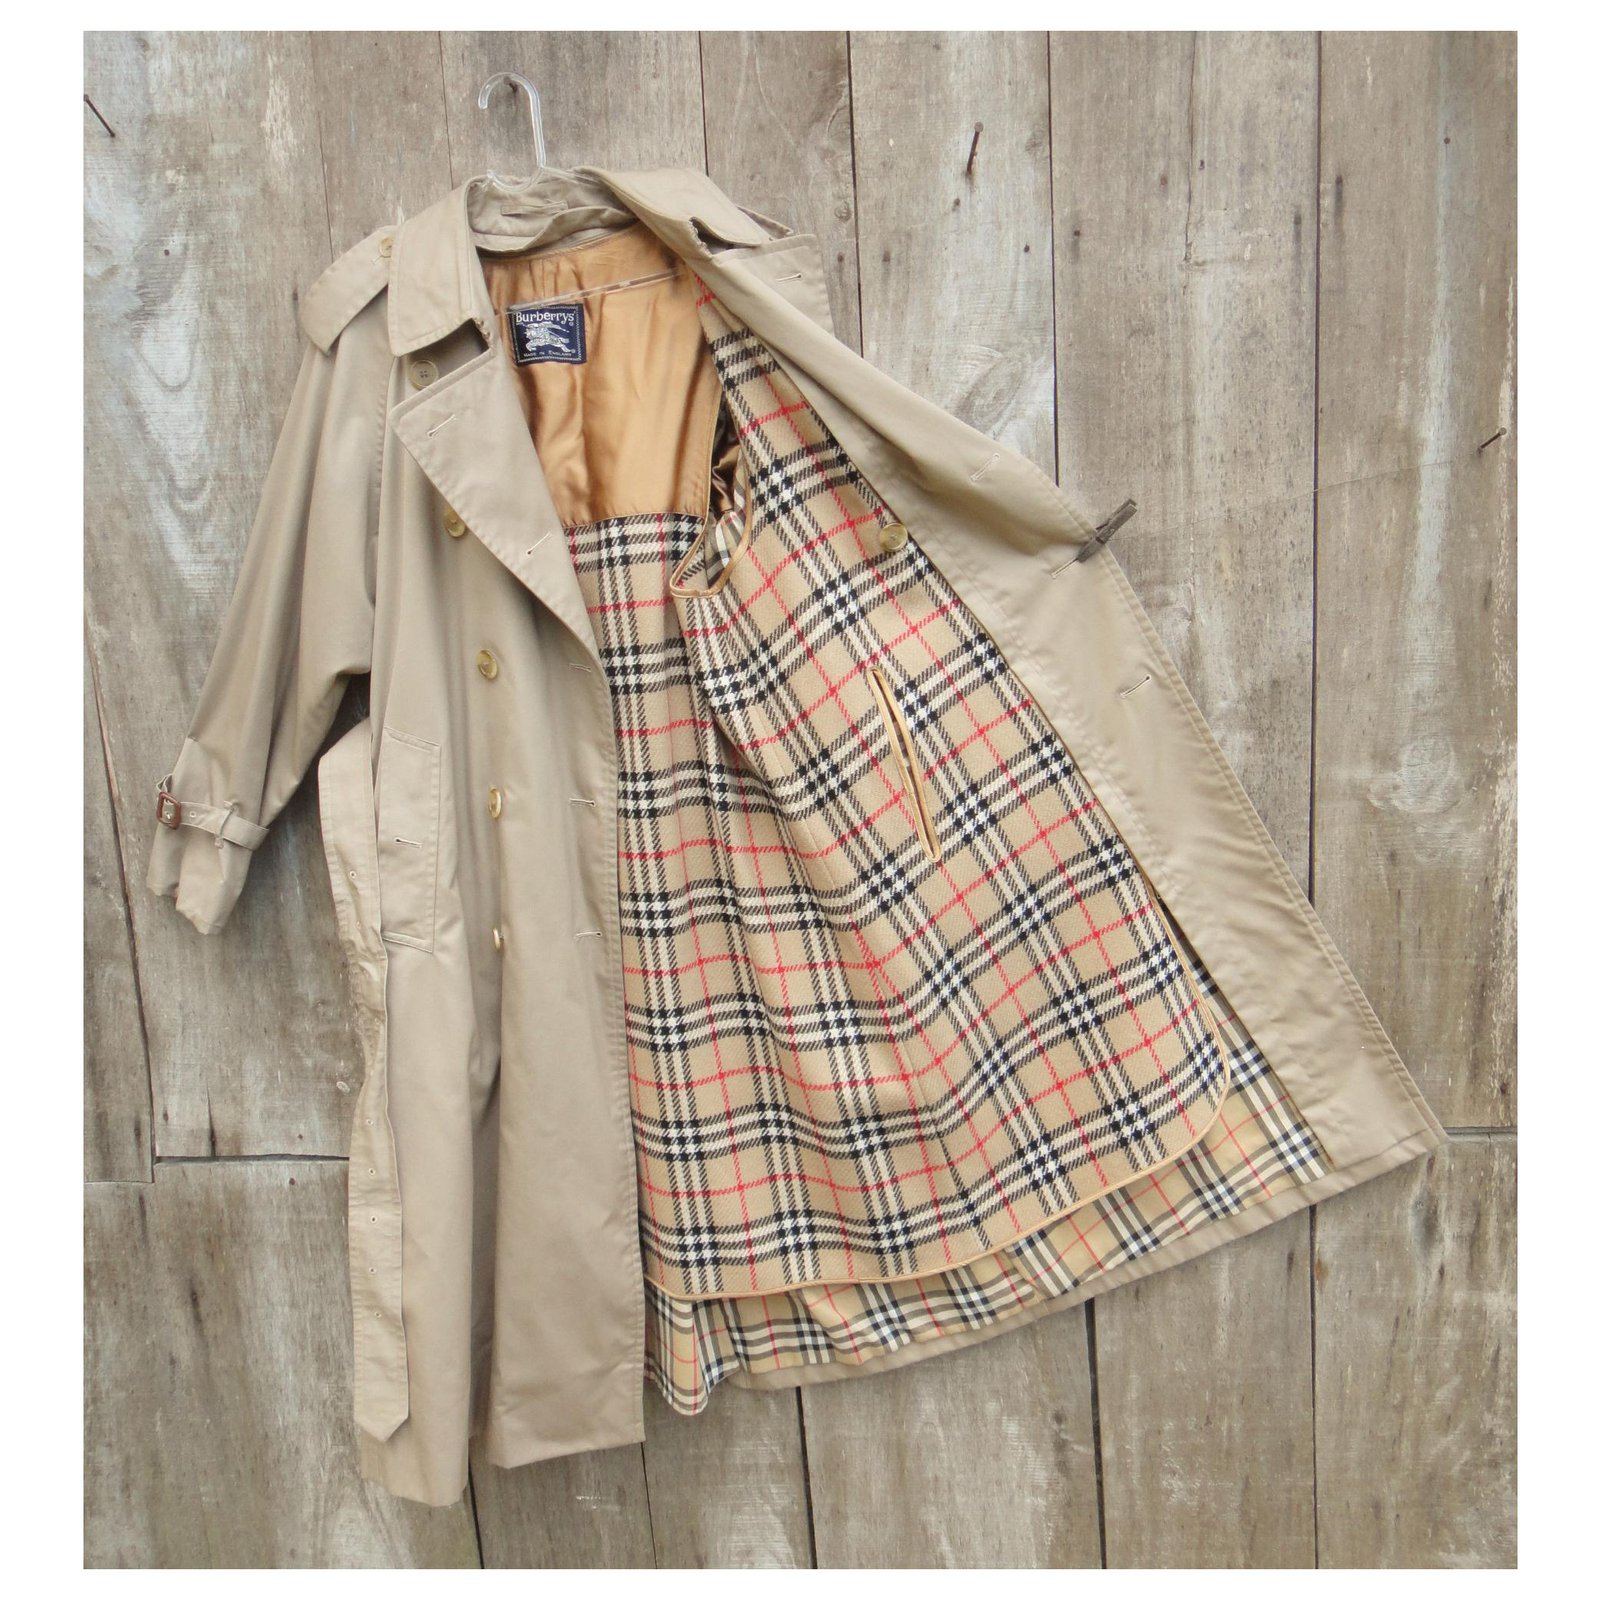 VINTAGE BURBERRY TRENCH COAT WITH REMOVABLE WOOL LINING